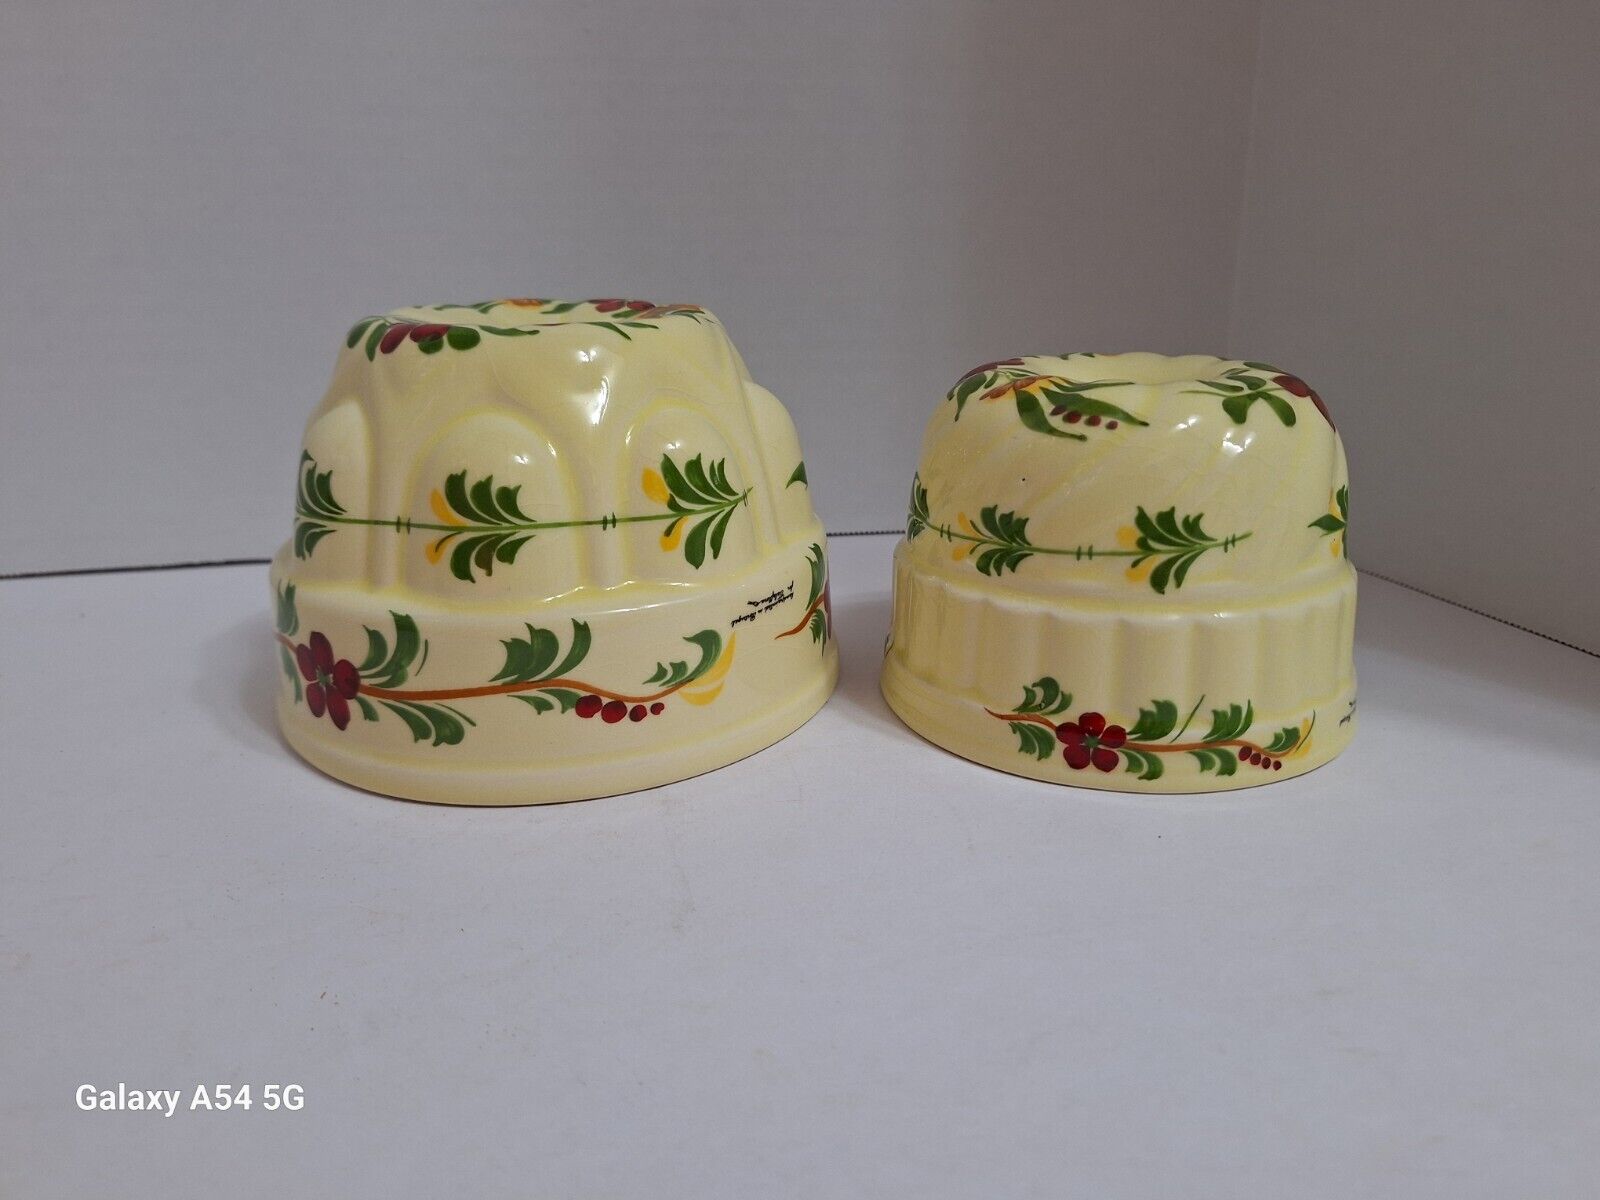 Vintage Teleflora Jello Mold Planter Set of 2 Hand Painted in Portugal w/Hangers